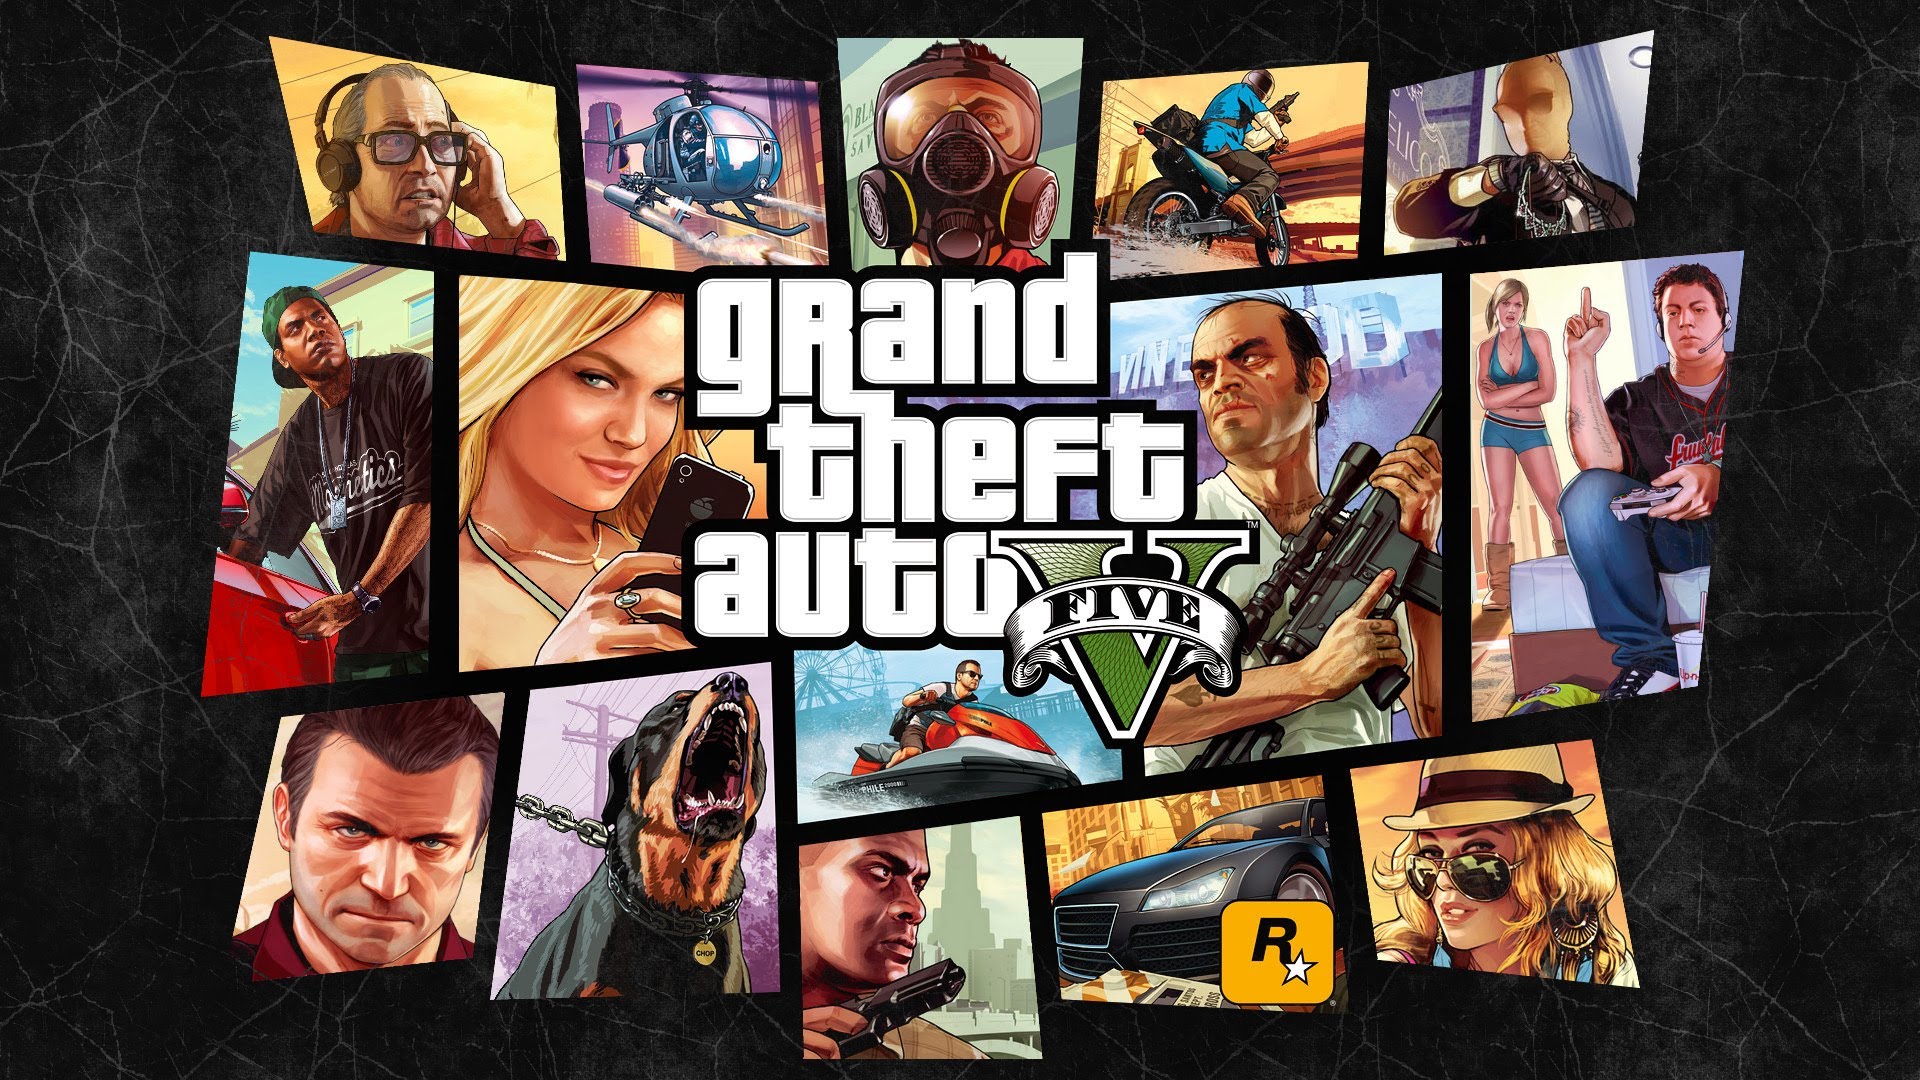 gta 5 wallpaper for pc,art,movie,poster,photography,collage